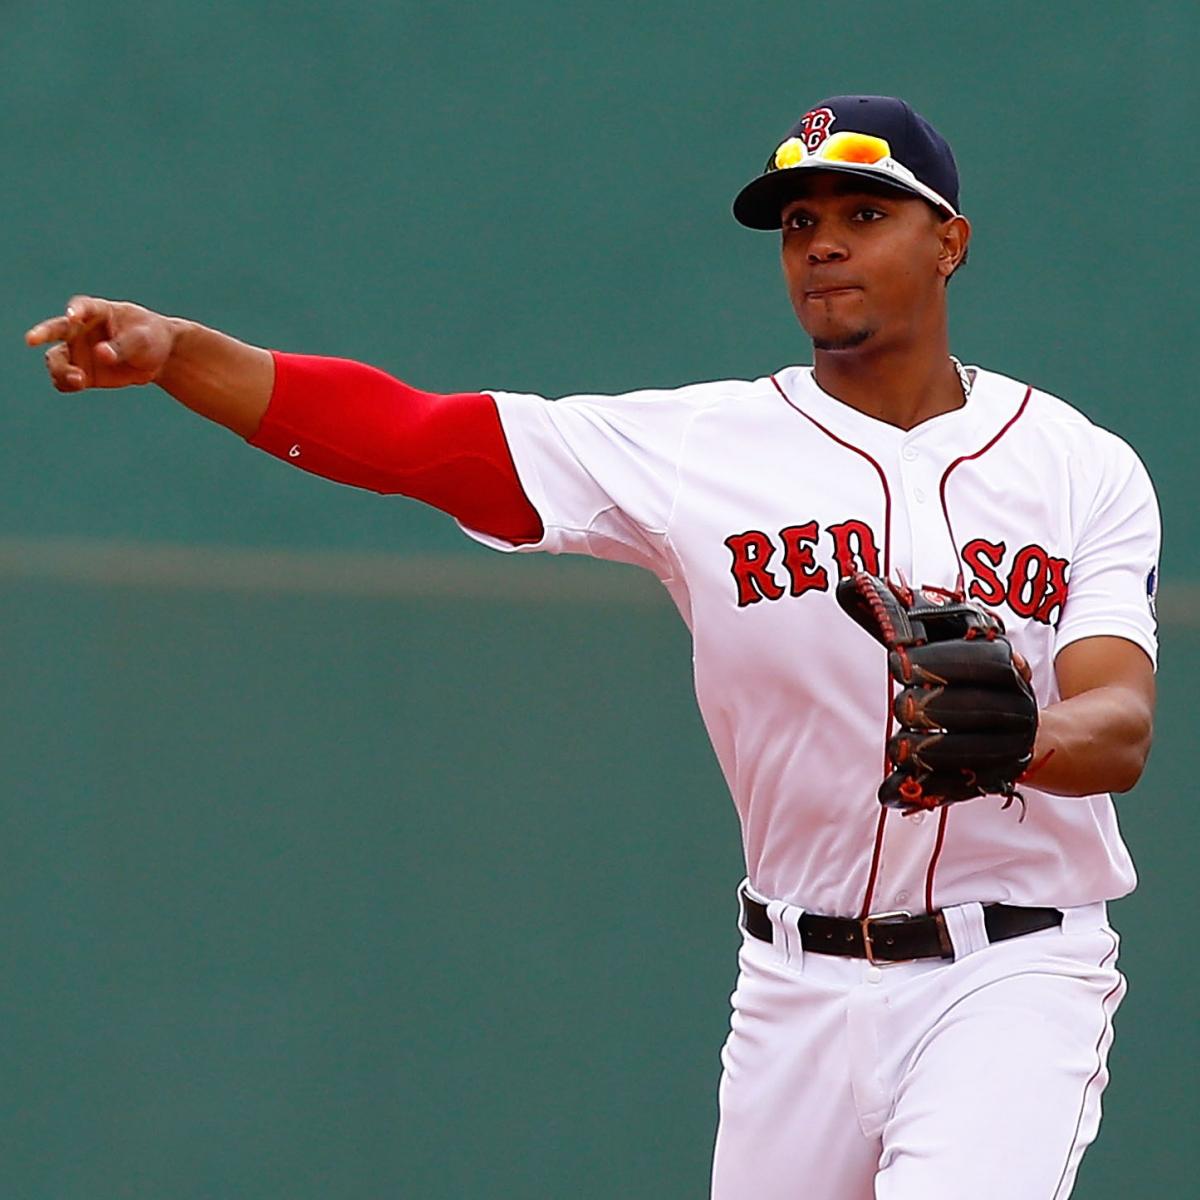 A hunch that Red Sox will go into spin mode if Xander Bogaerts